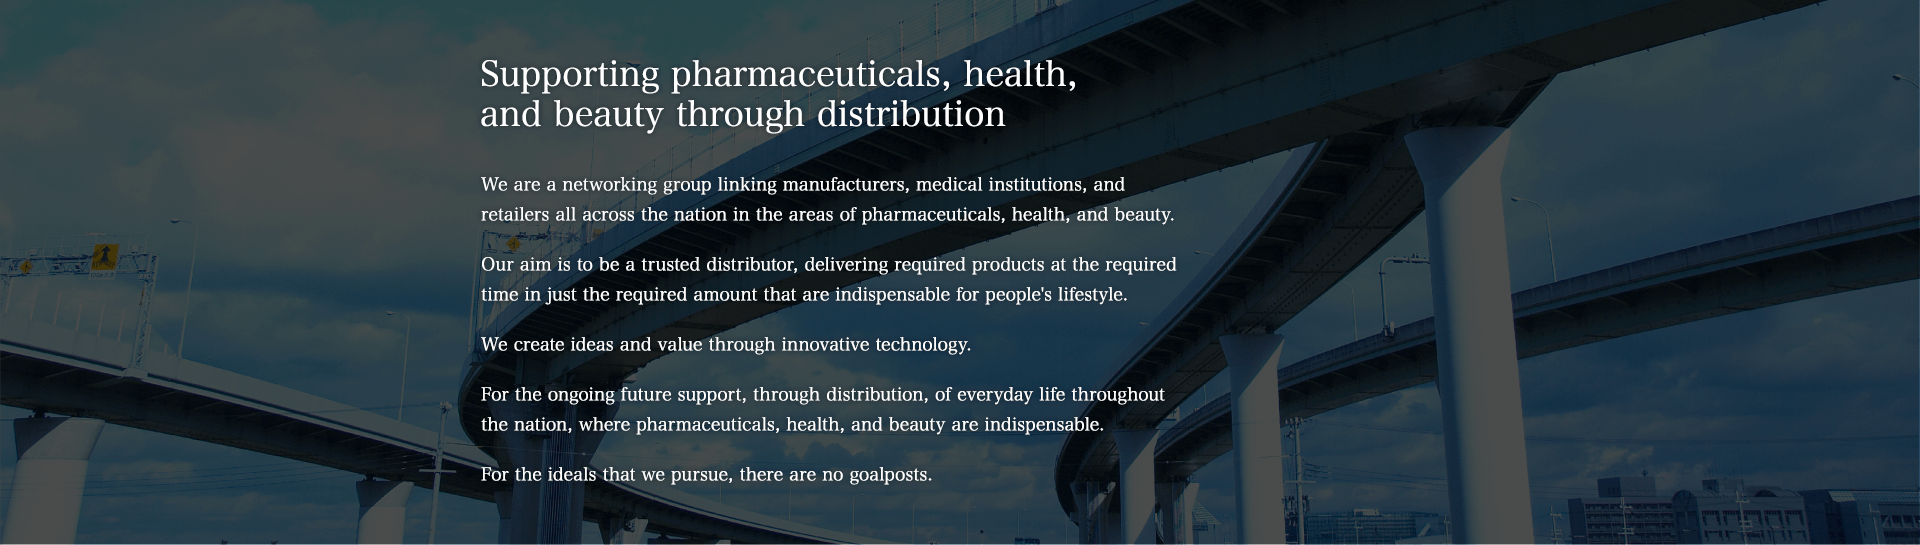 Supporting pharmaceuticals, health, and beauty through distribution